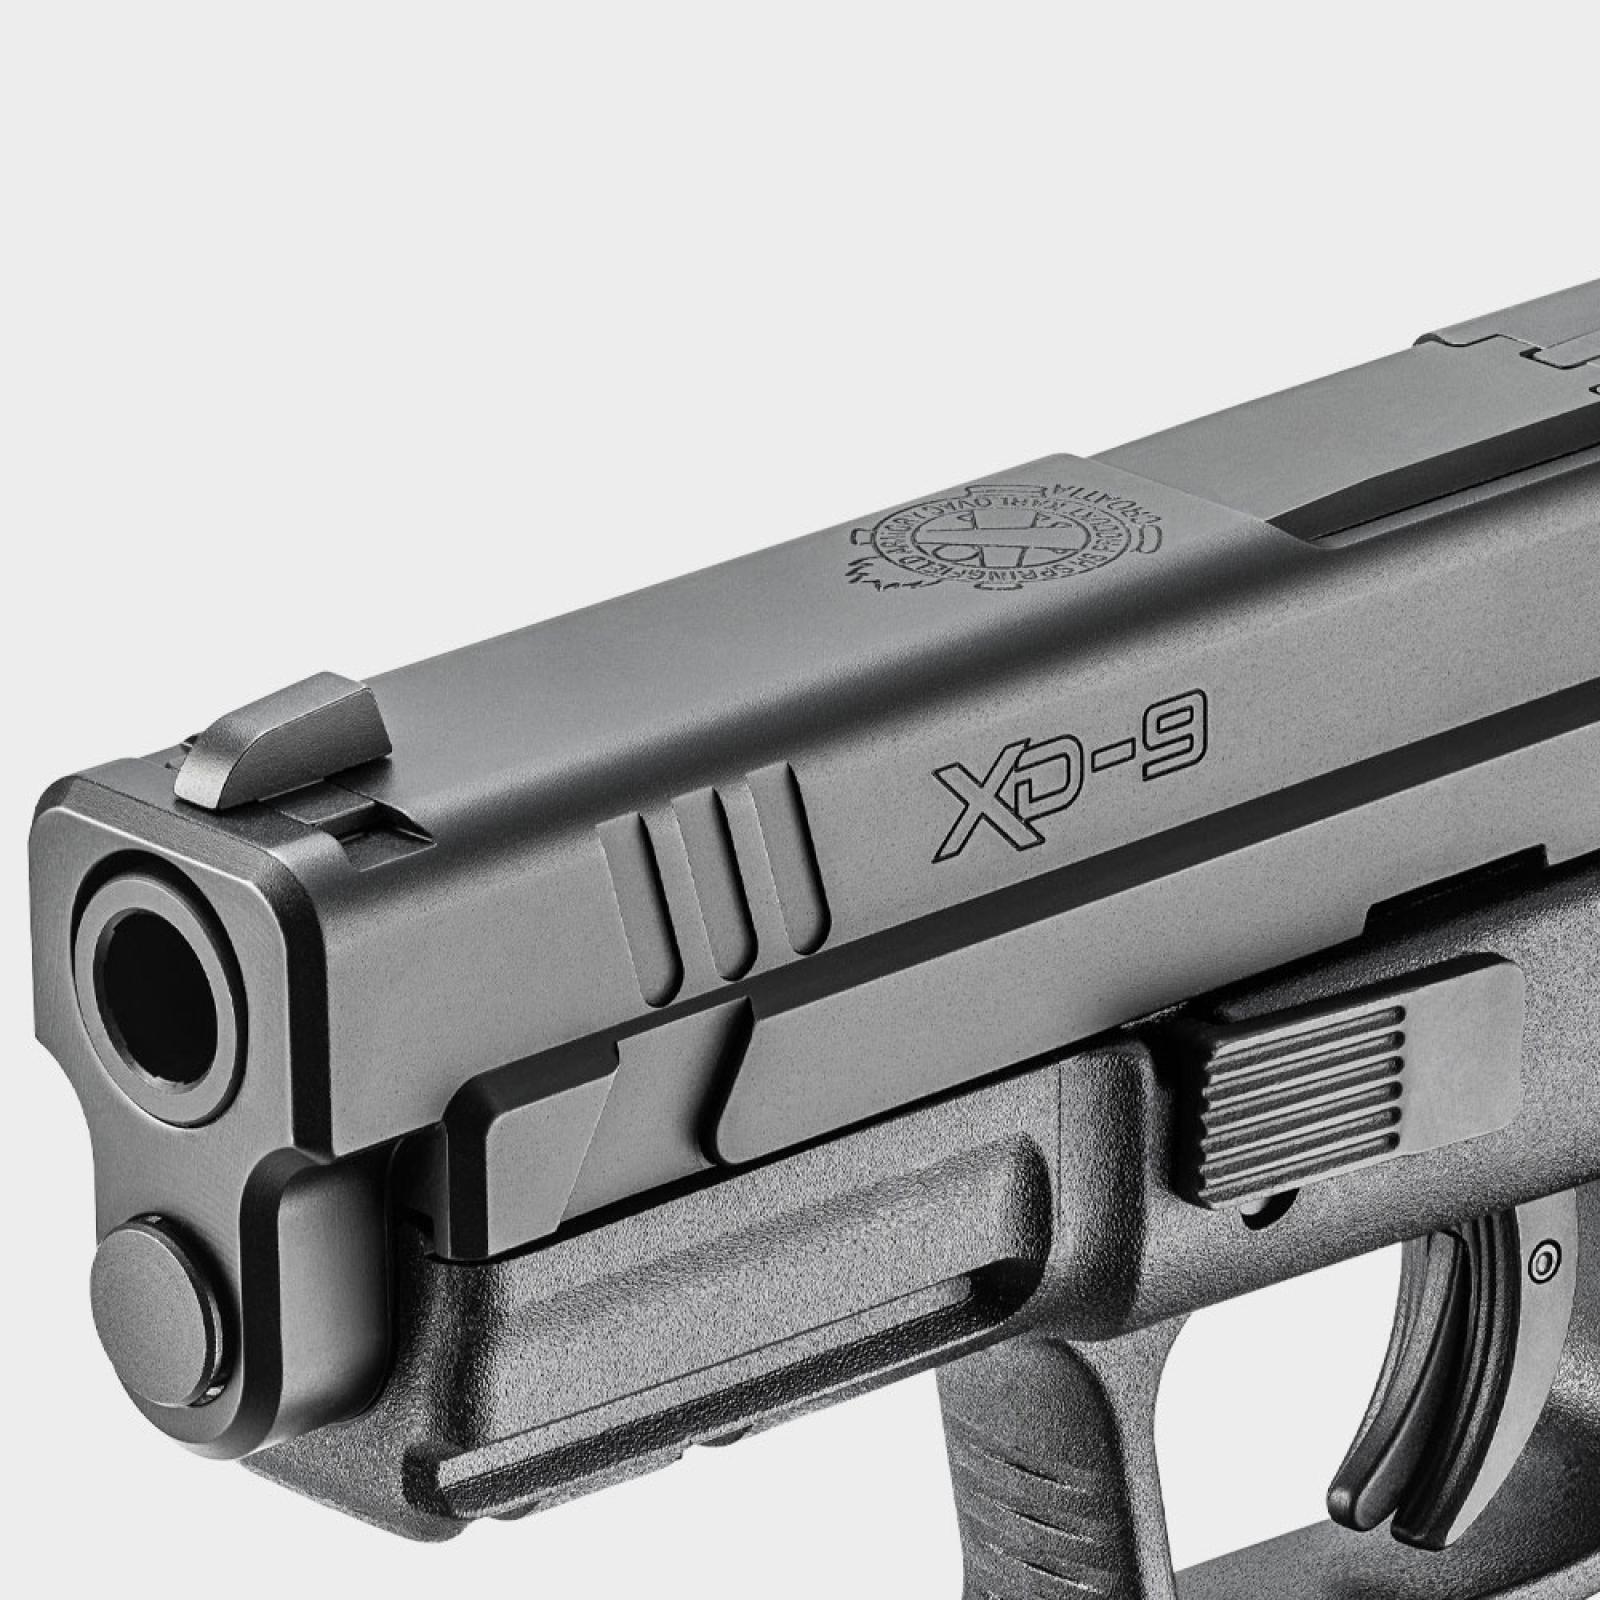 Springfield Armory Defend Your Legacy Series XD® 4" Service Model 9mm Handgun